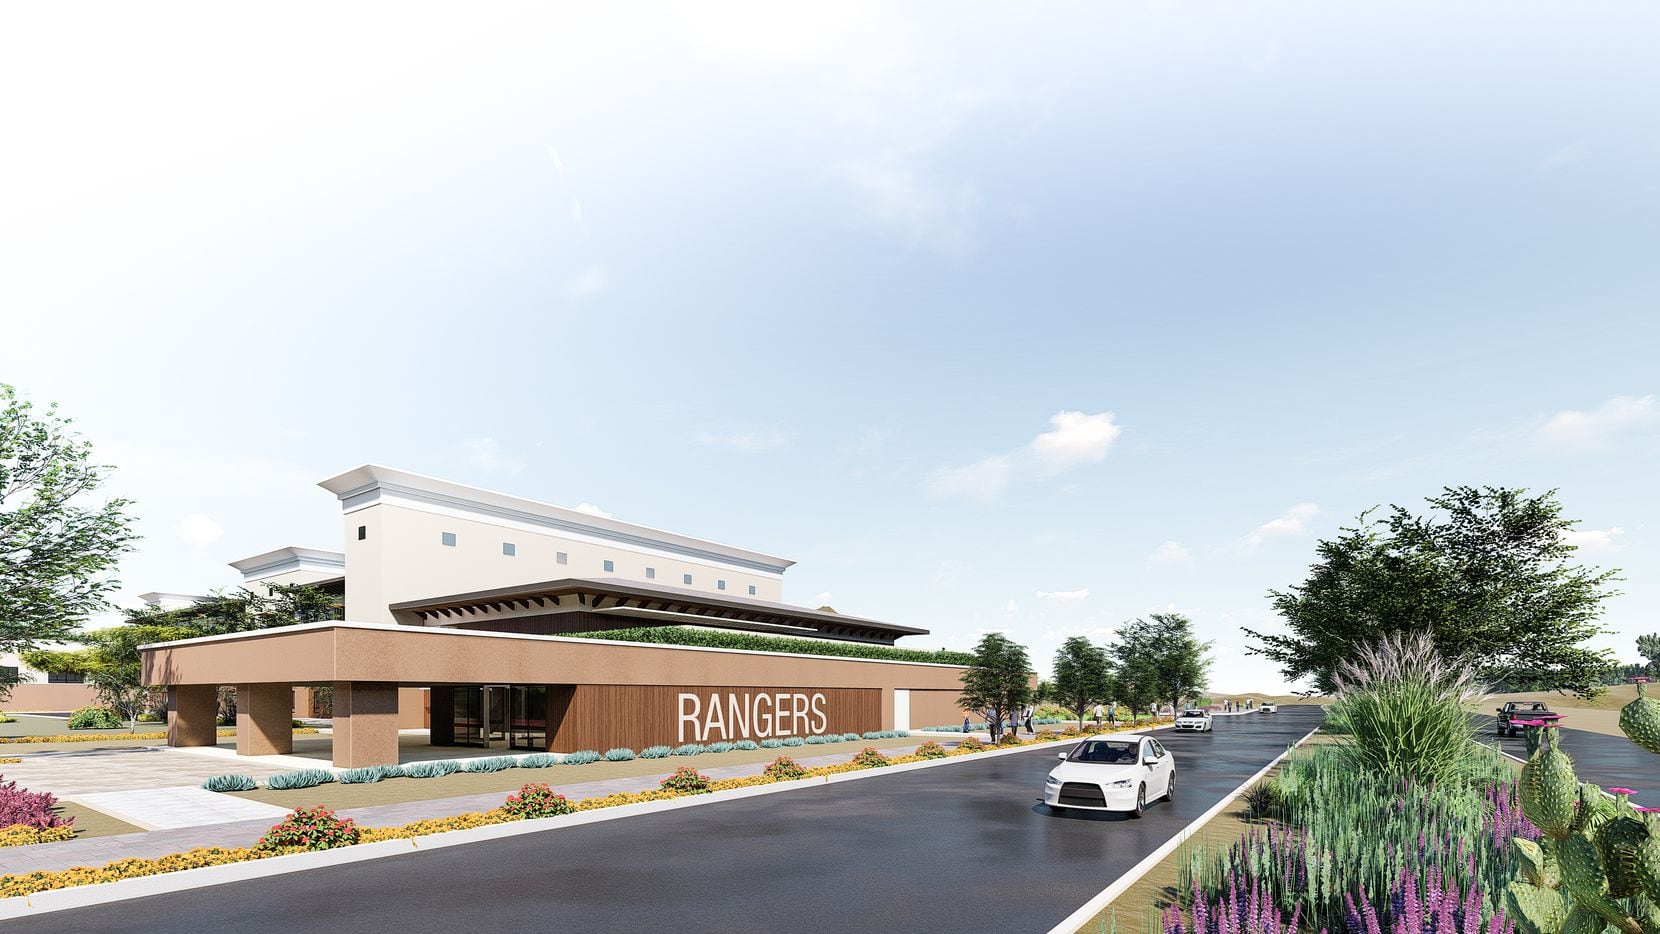 A rendering of the Texas Rangers' new baseball housing facility in Surprise, Ariz.